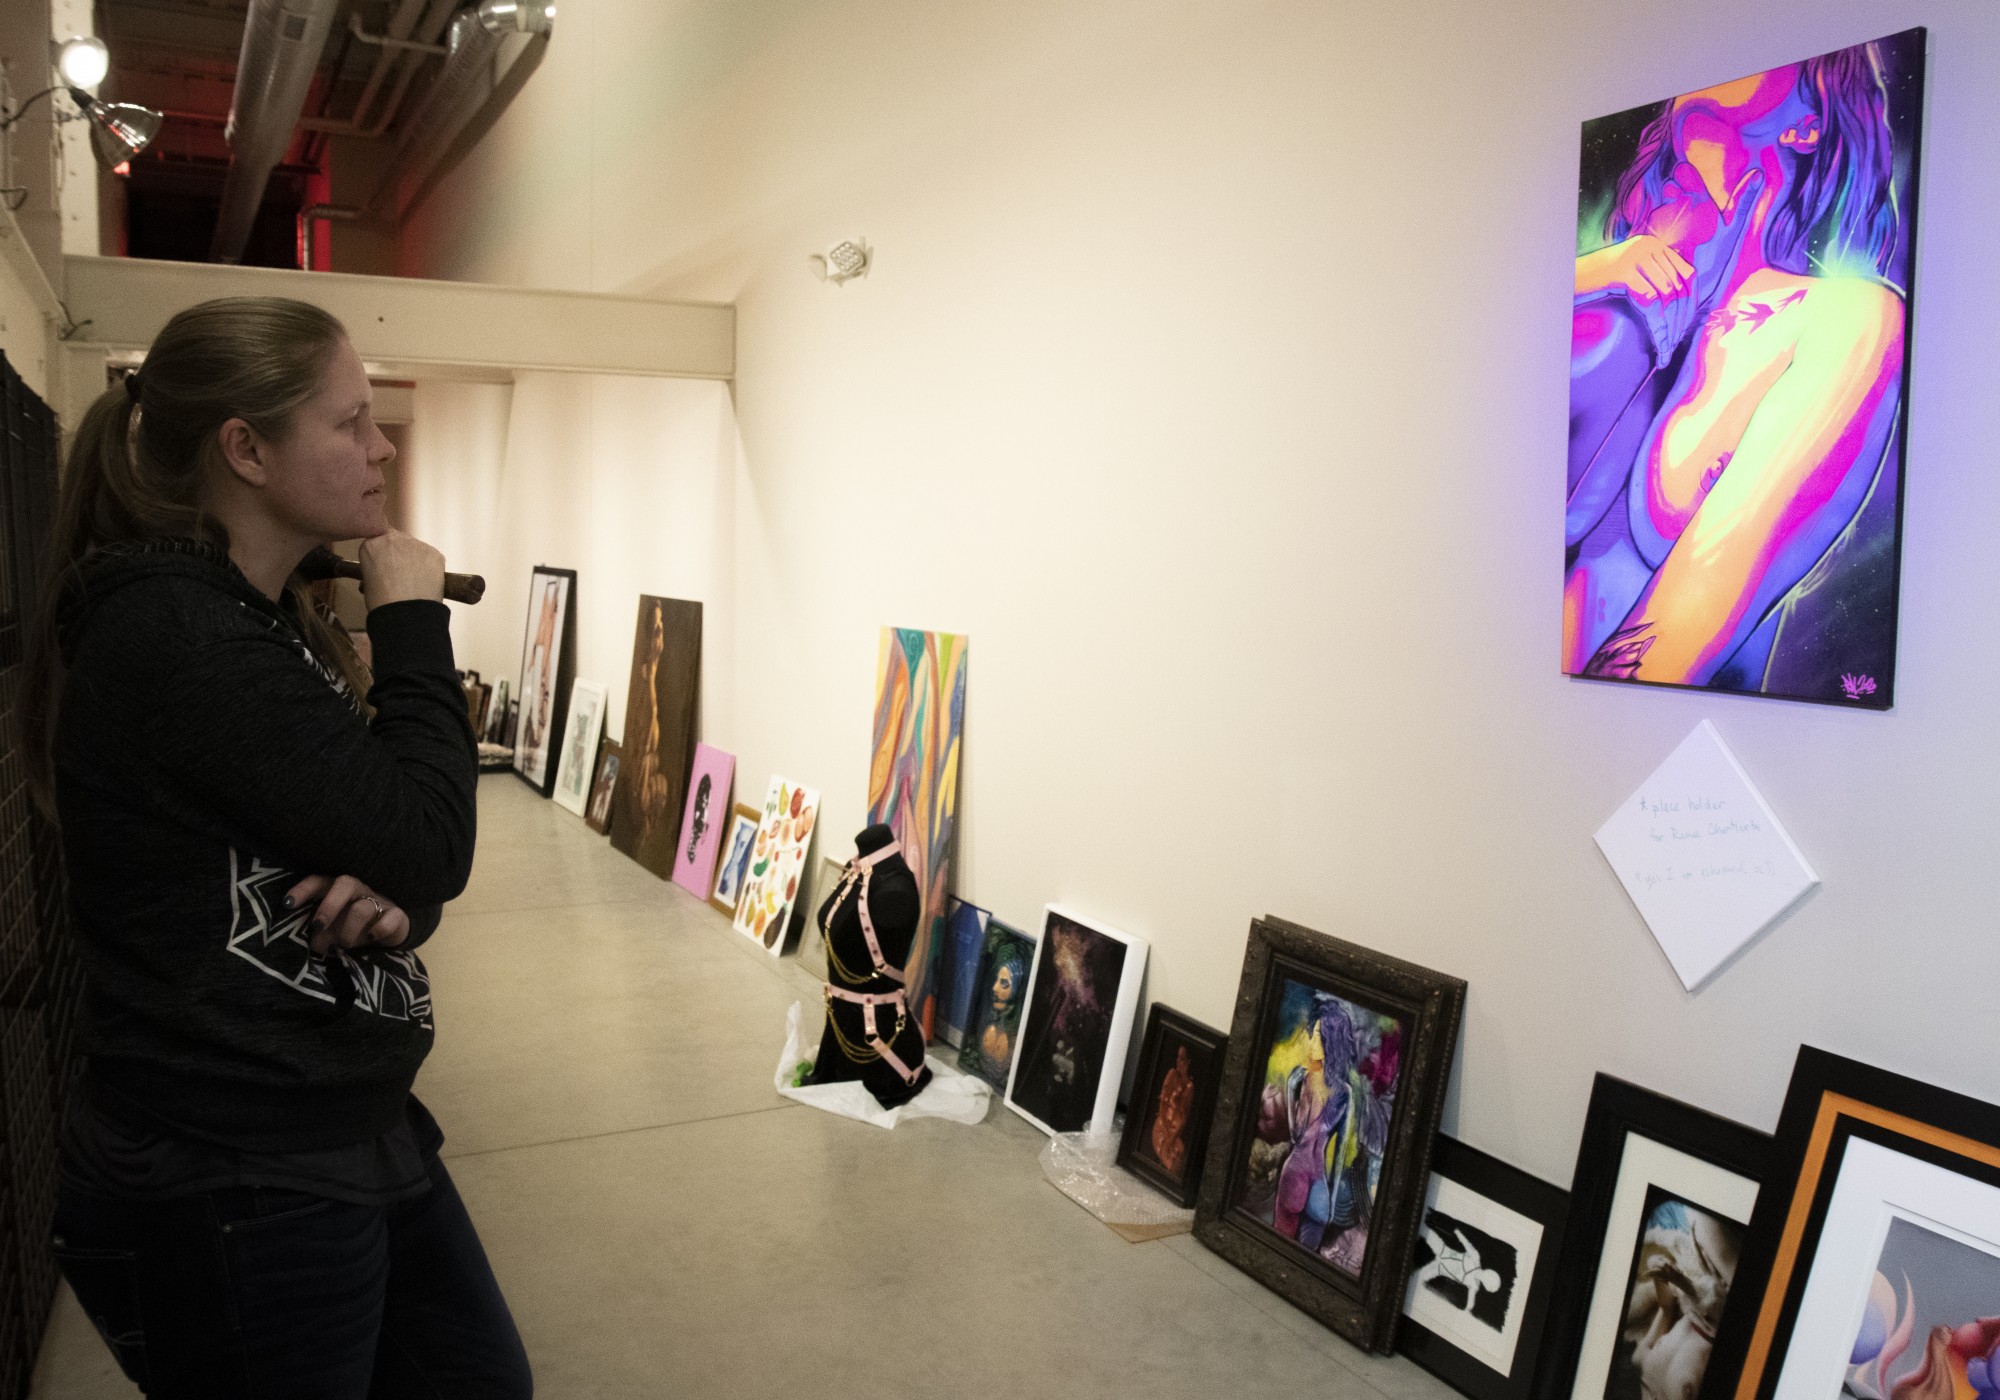 Angel Hawari evaluates the placement of a painting during setup for Safeword: An Erotic Art Show at the A-Mill Underground Museum on Saturday, Feb. 8.